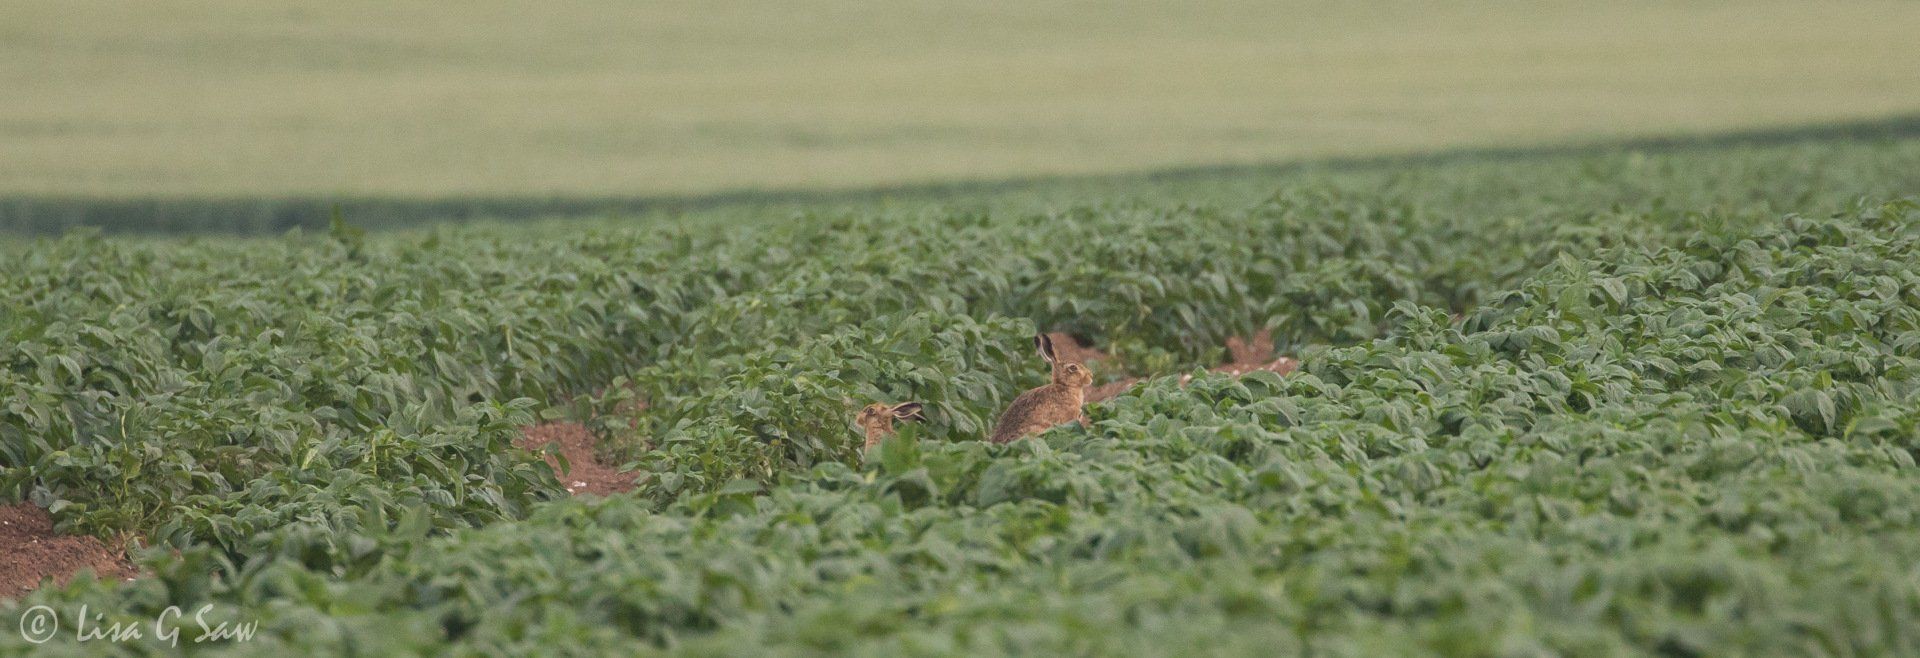 Adult hare and leveret facing opposite directions